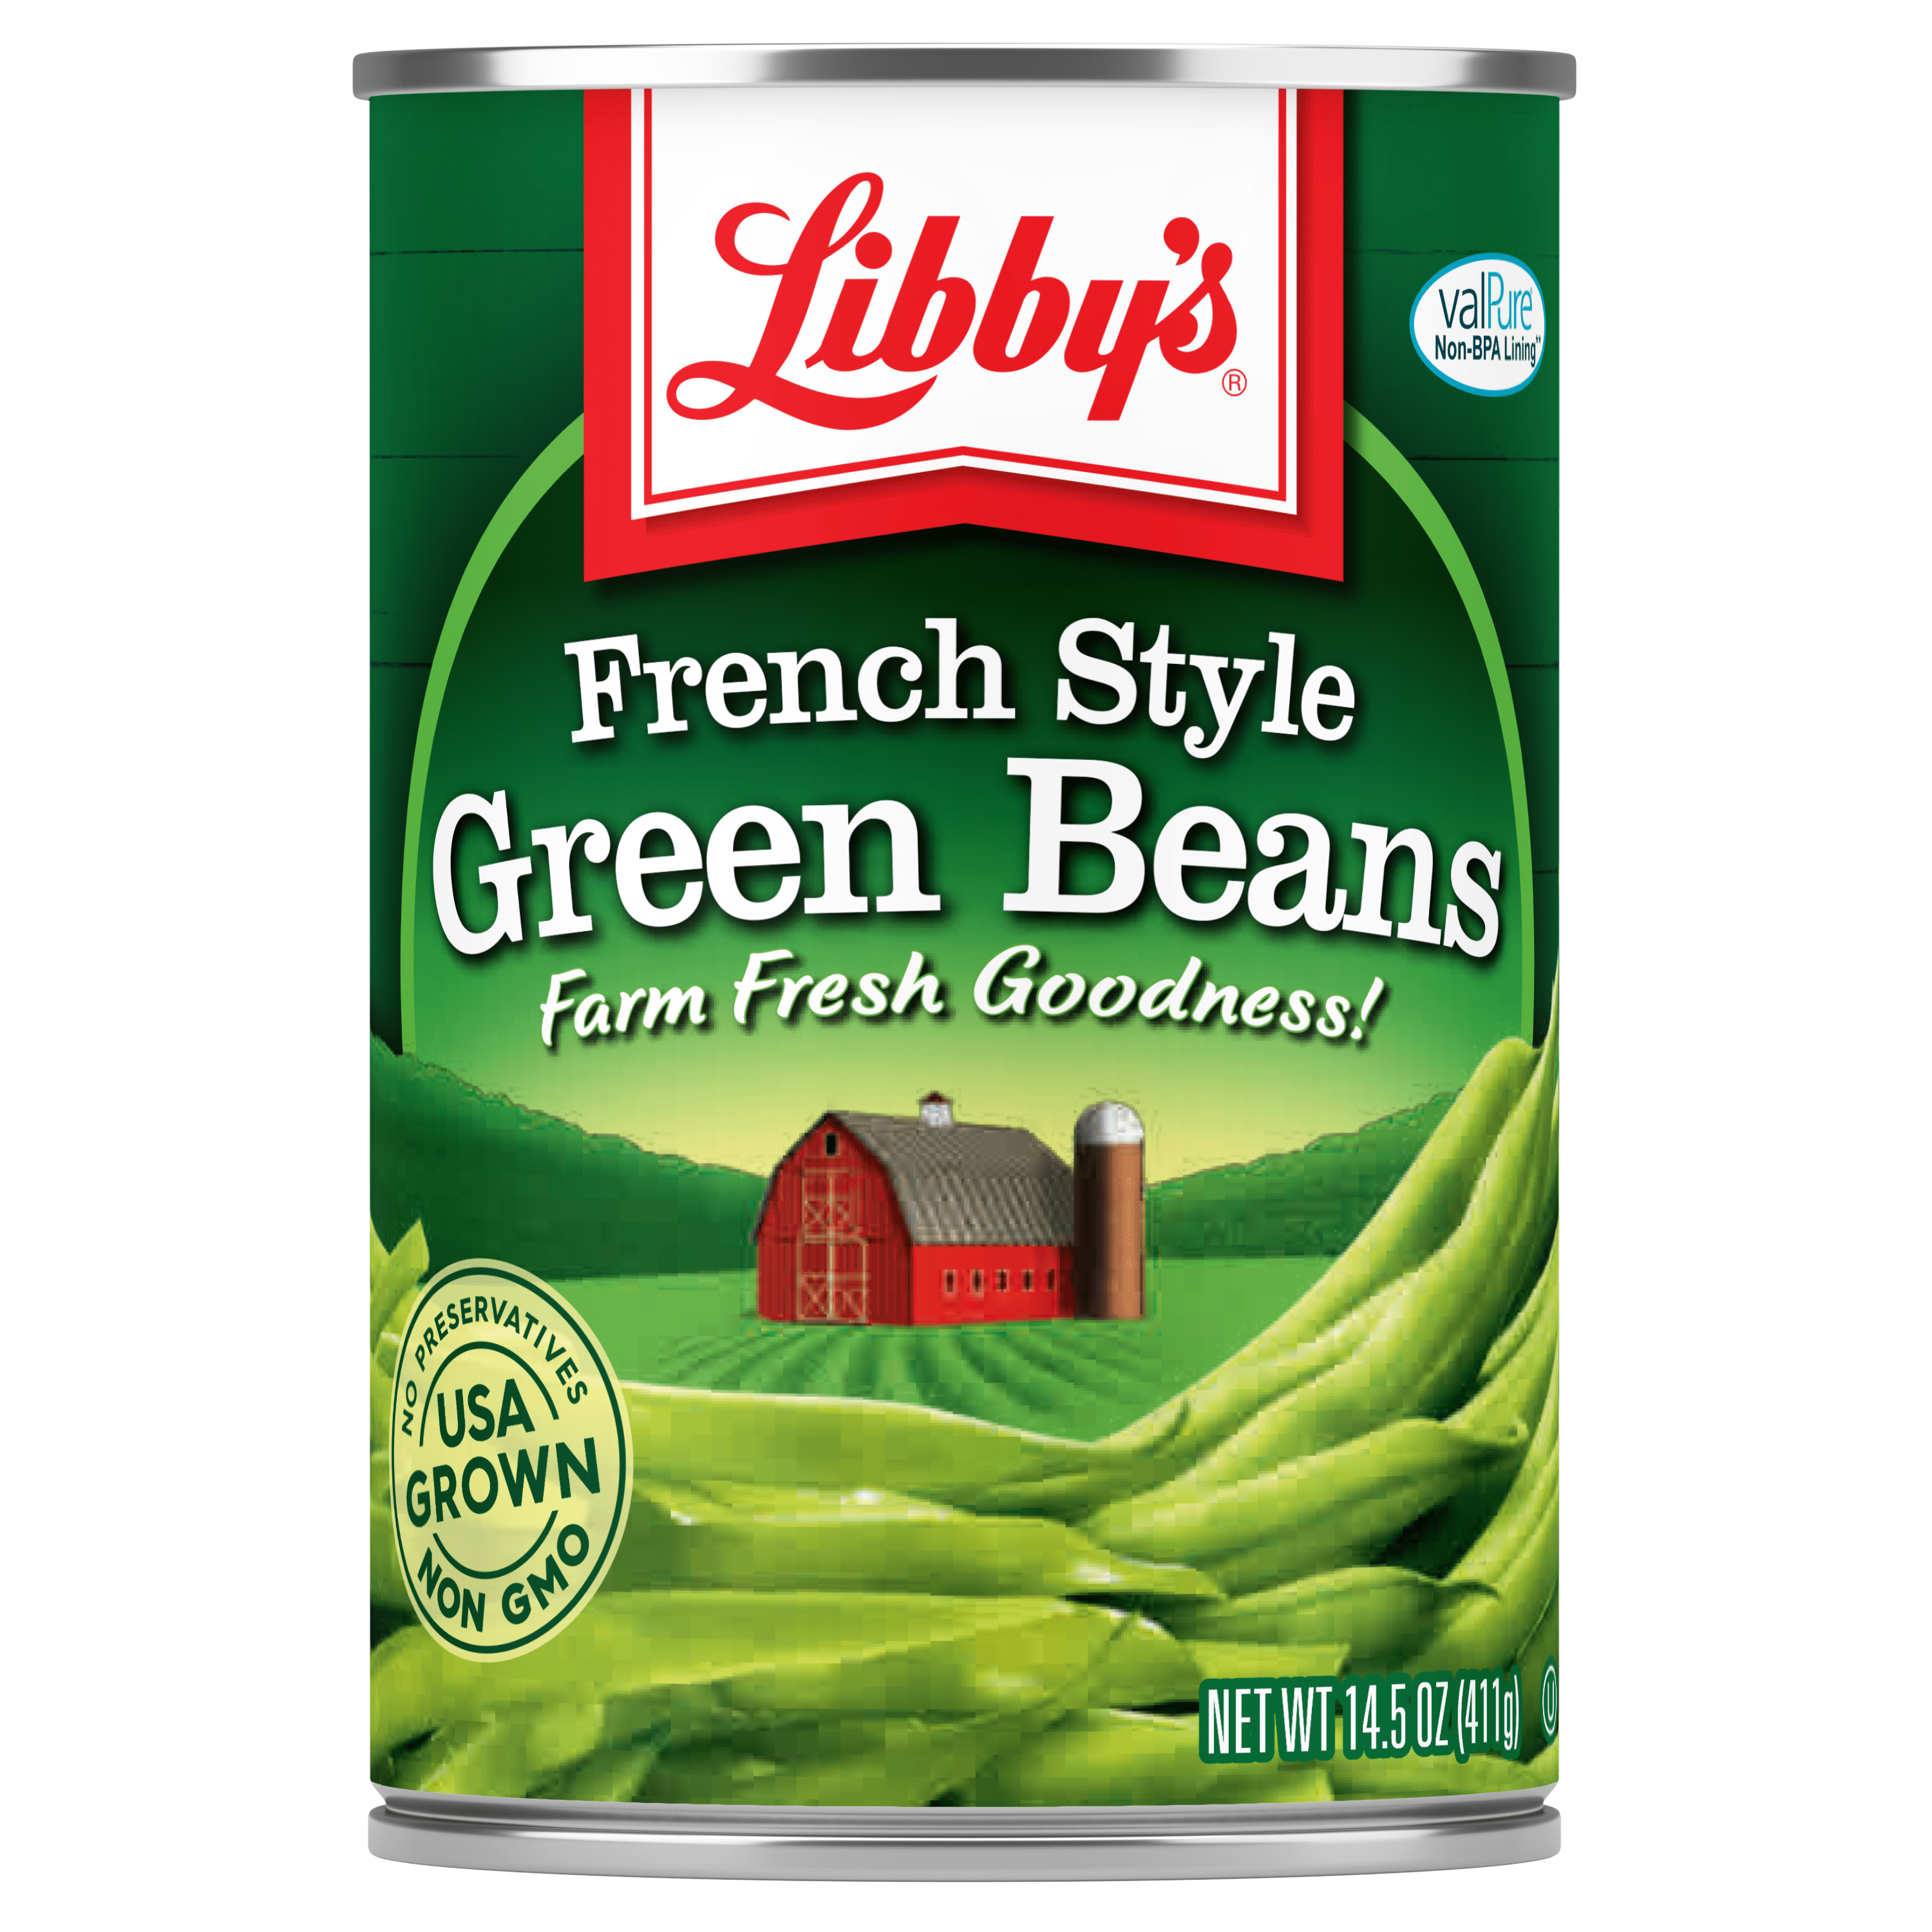 Libby's French Style Green Beans, Canned French Style Green Beans, 14.5 oz. Can